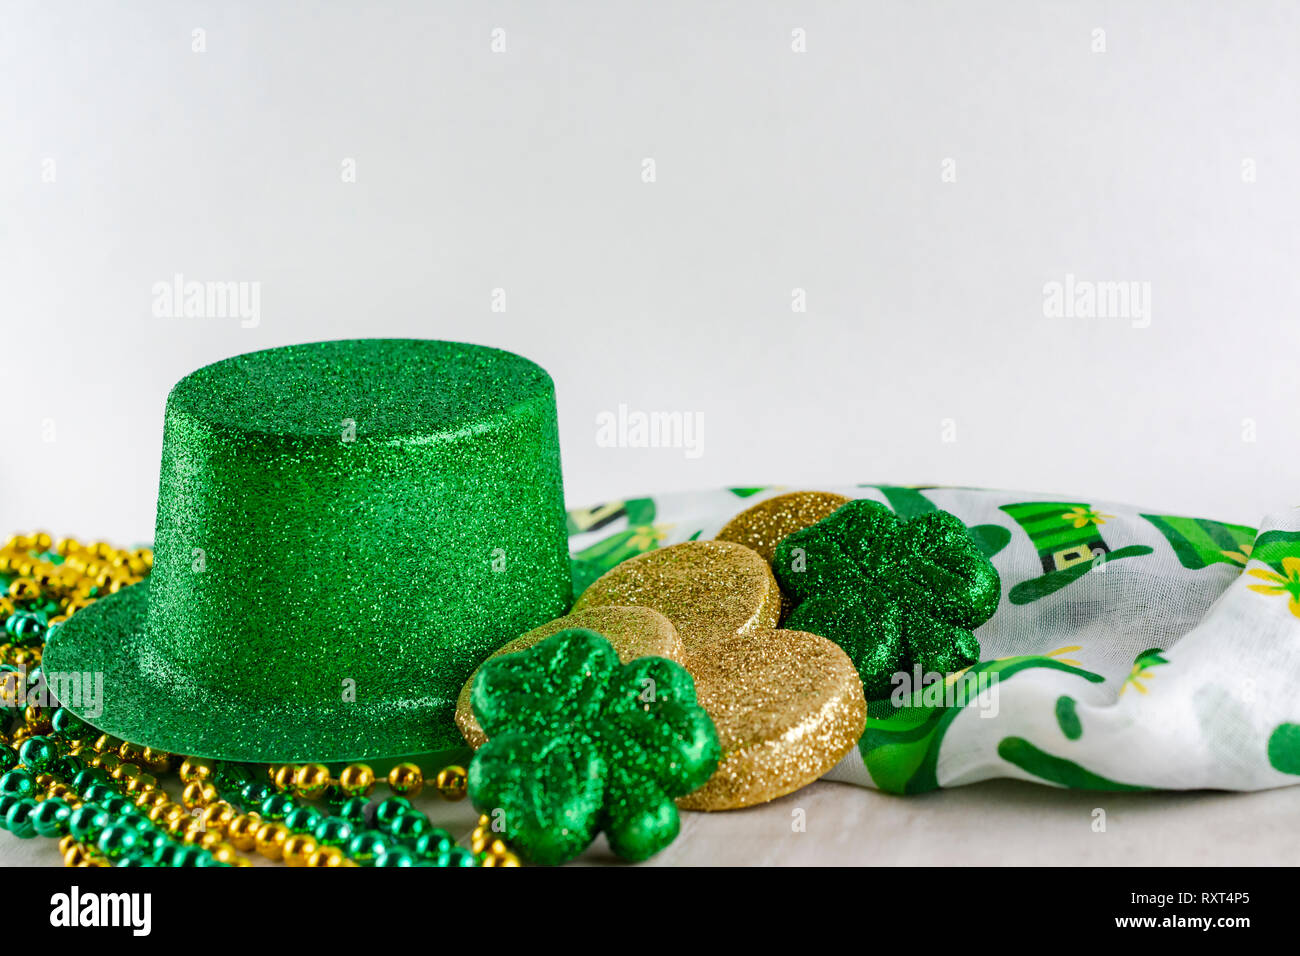 Saint Patrick's Day green top hat with gold coins, green shamrocks, green and gold beads, and colorful scarf.  White background with copy space above. Stock Photo